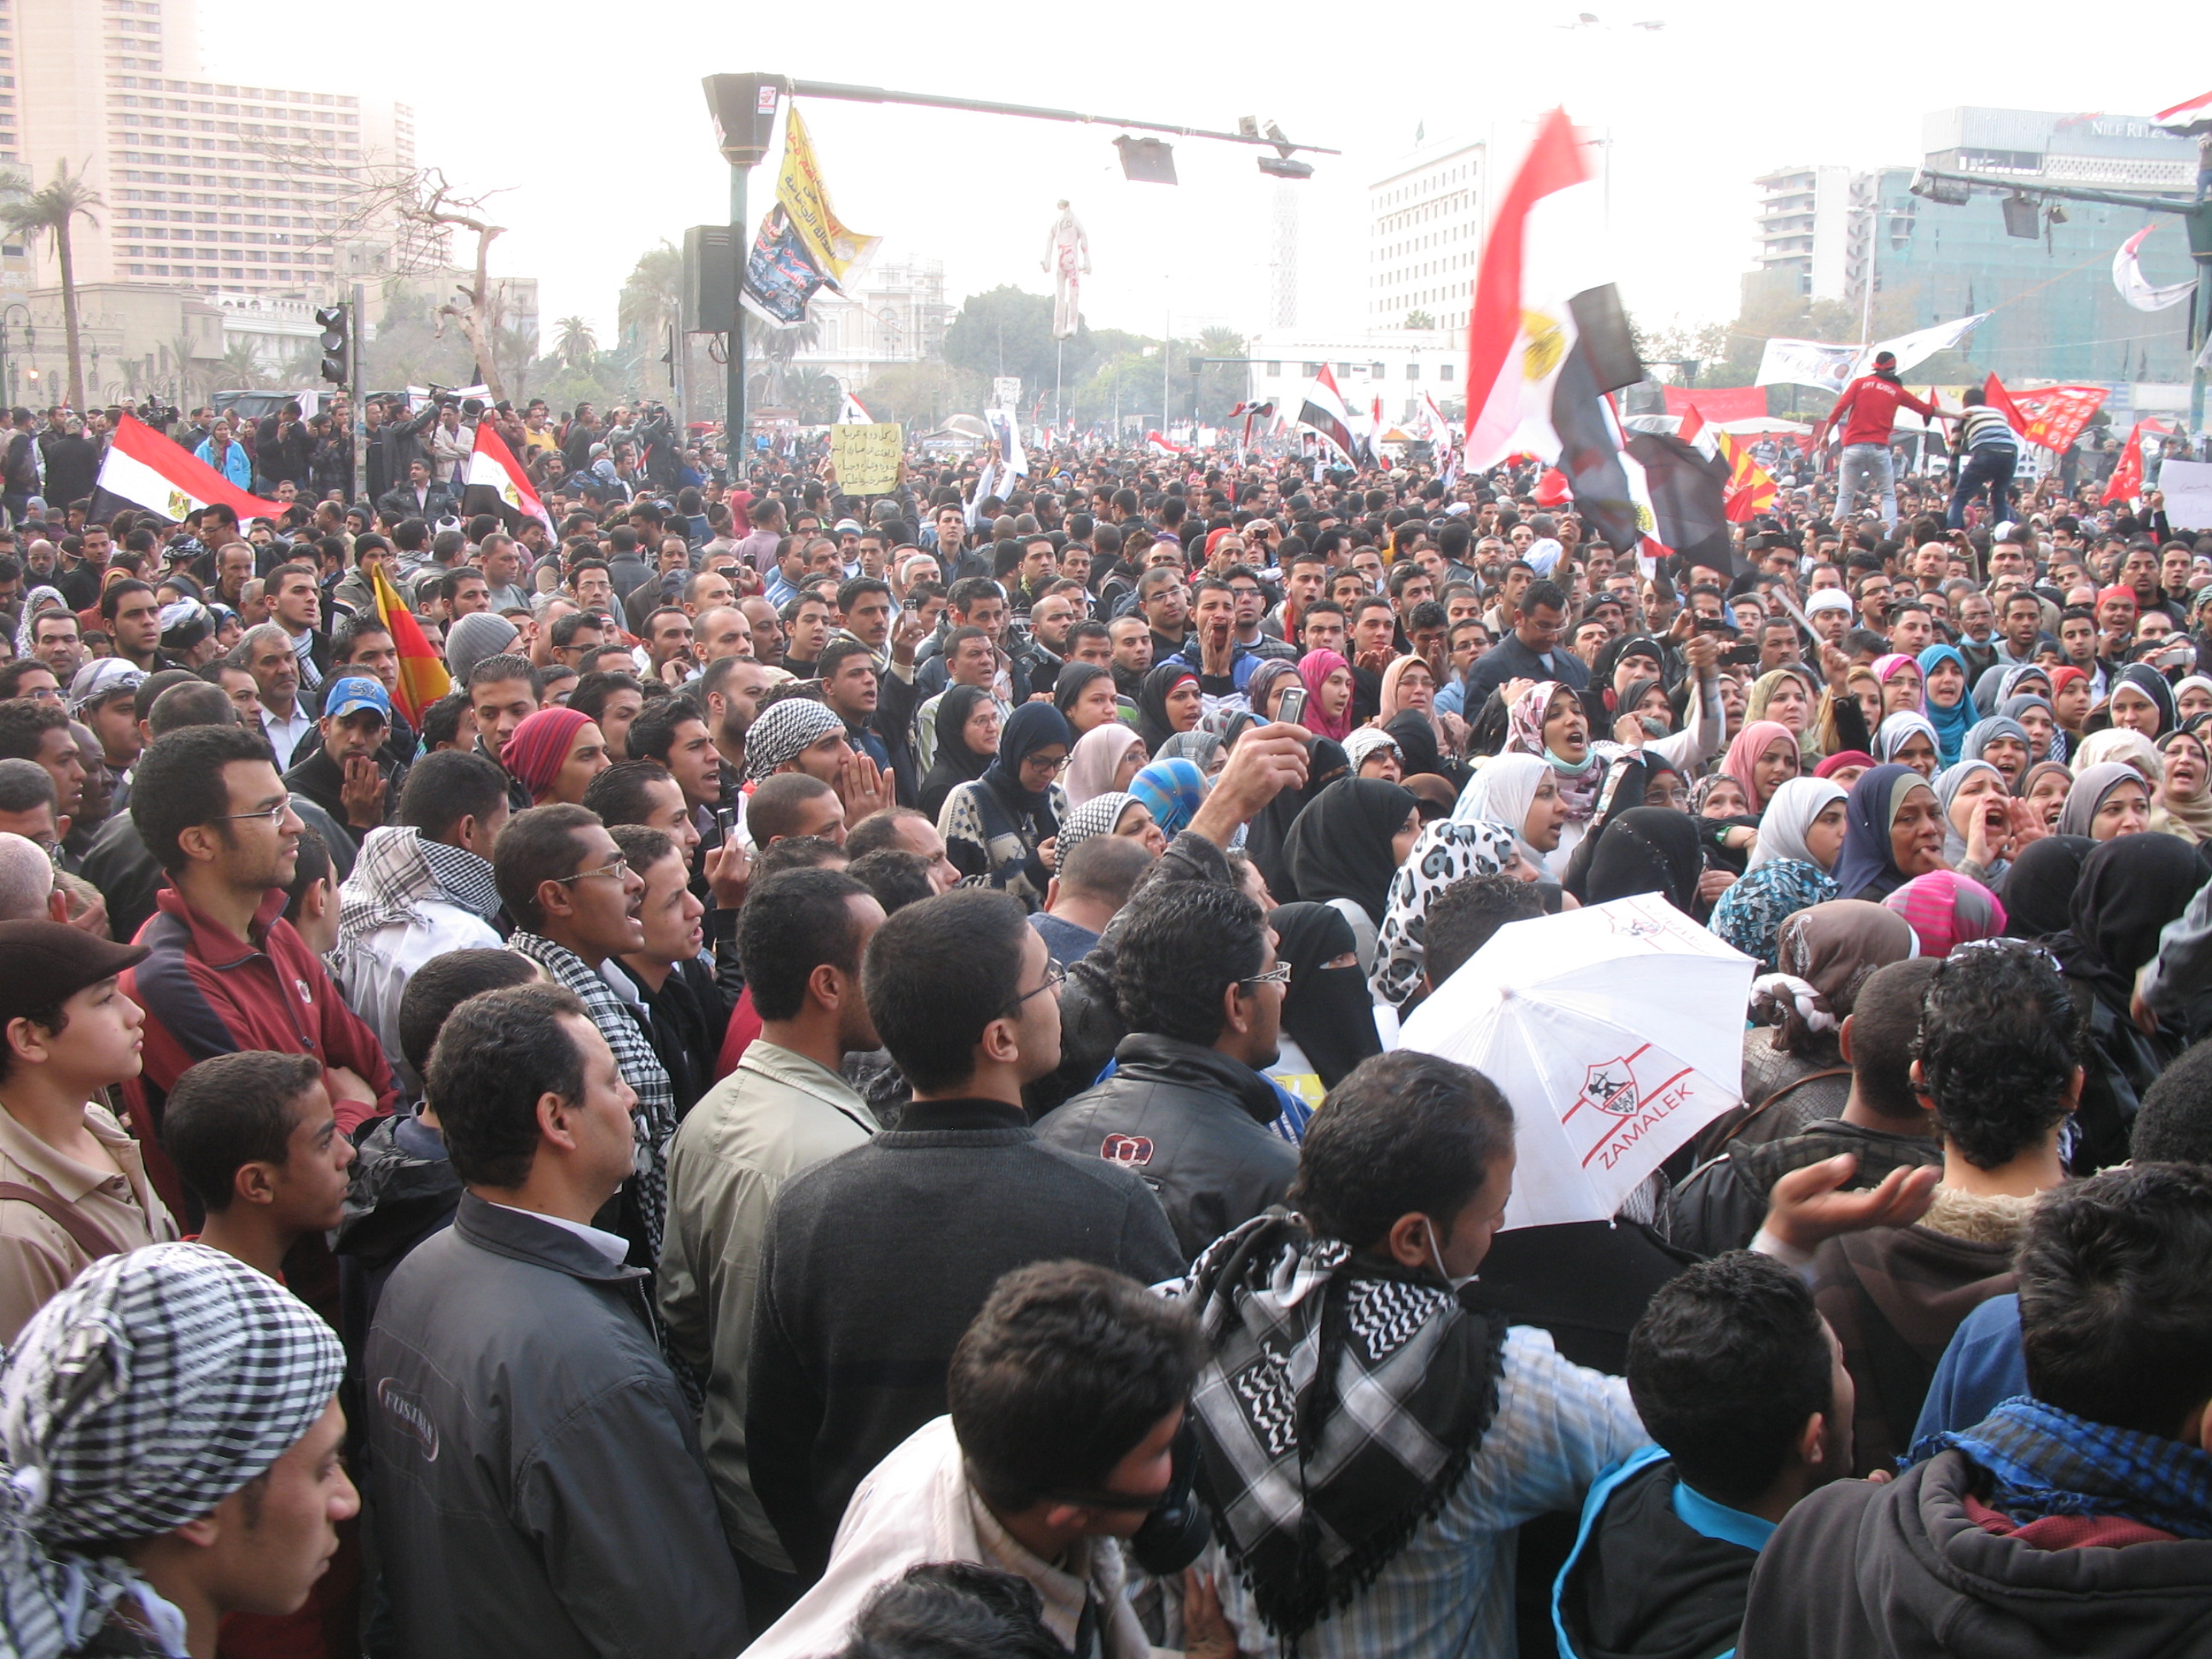 Rally in Tahrir Square Cairo, February 2012